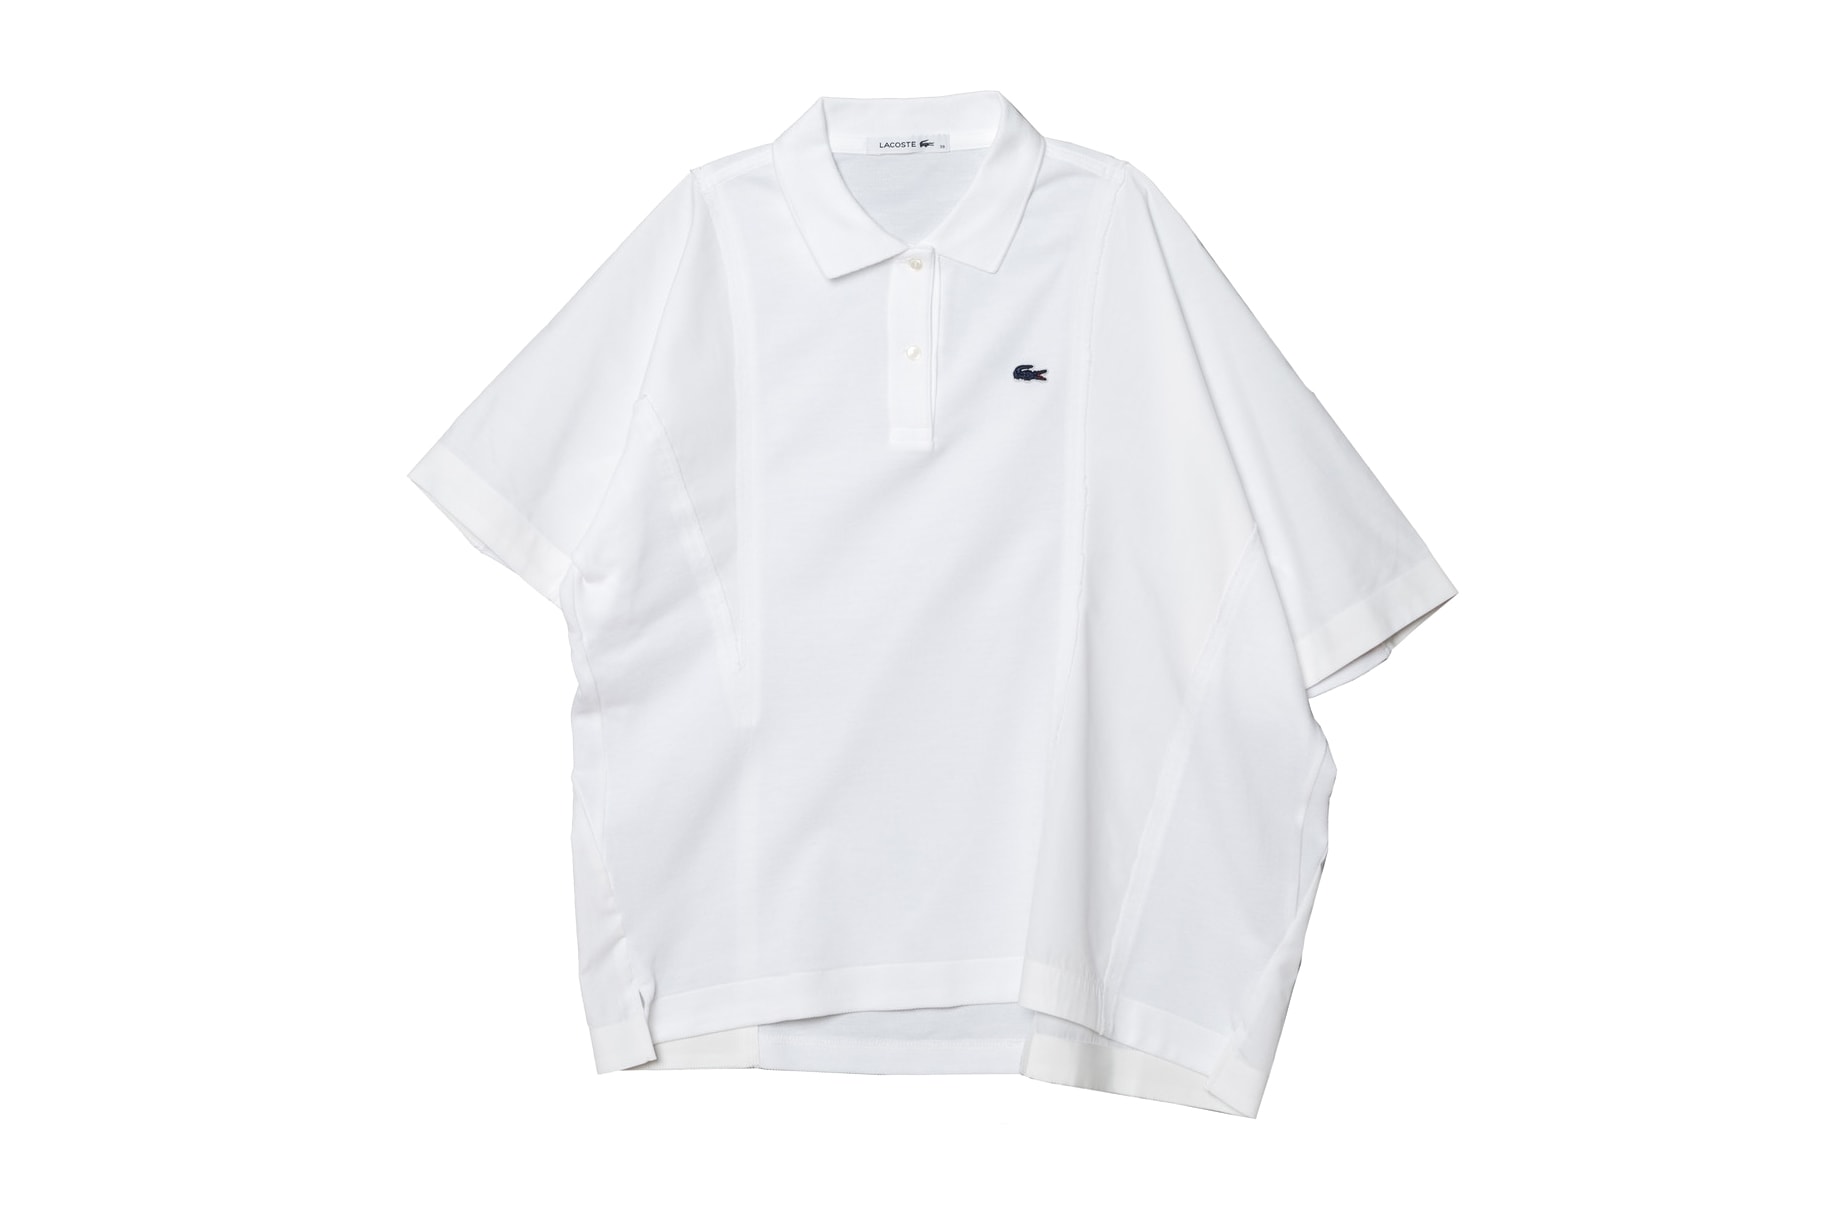 Lacoste Sacai New 2017 Collaboration Polo Sweaters jumpers drews blouses tops tennis